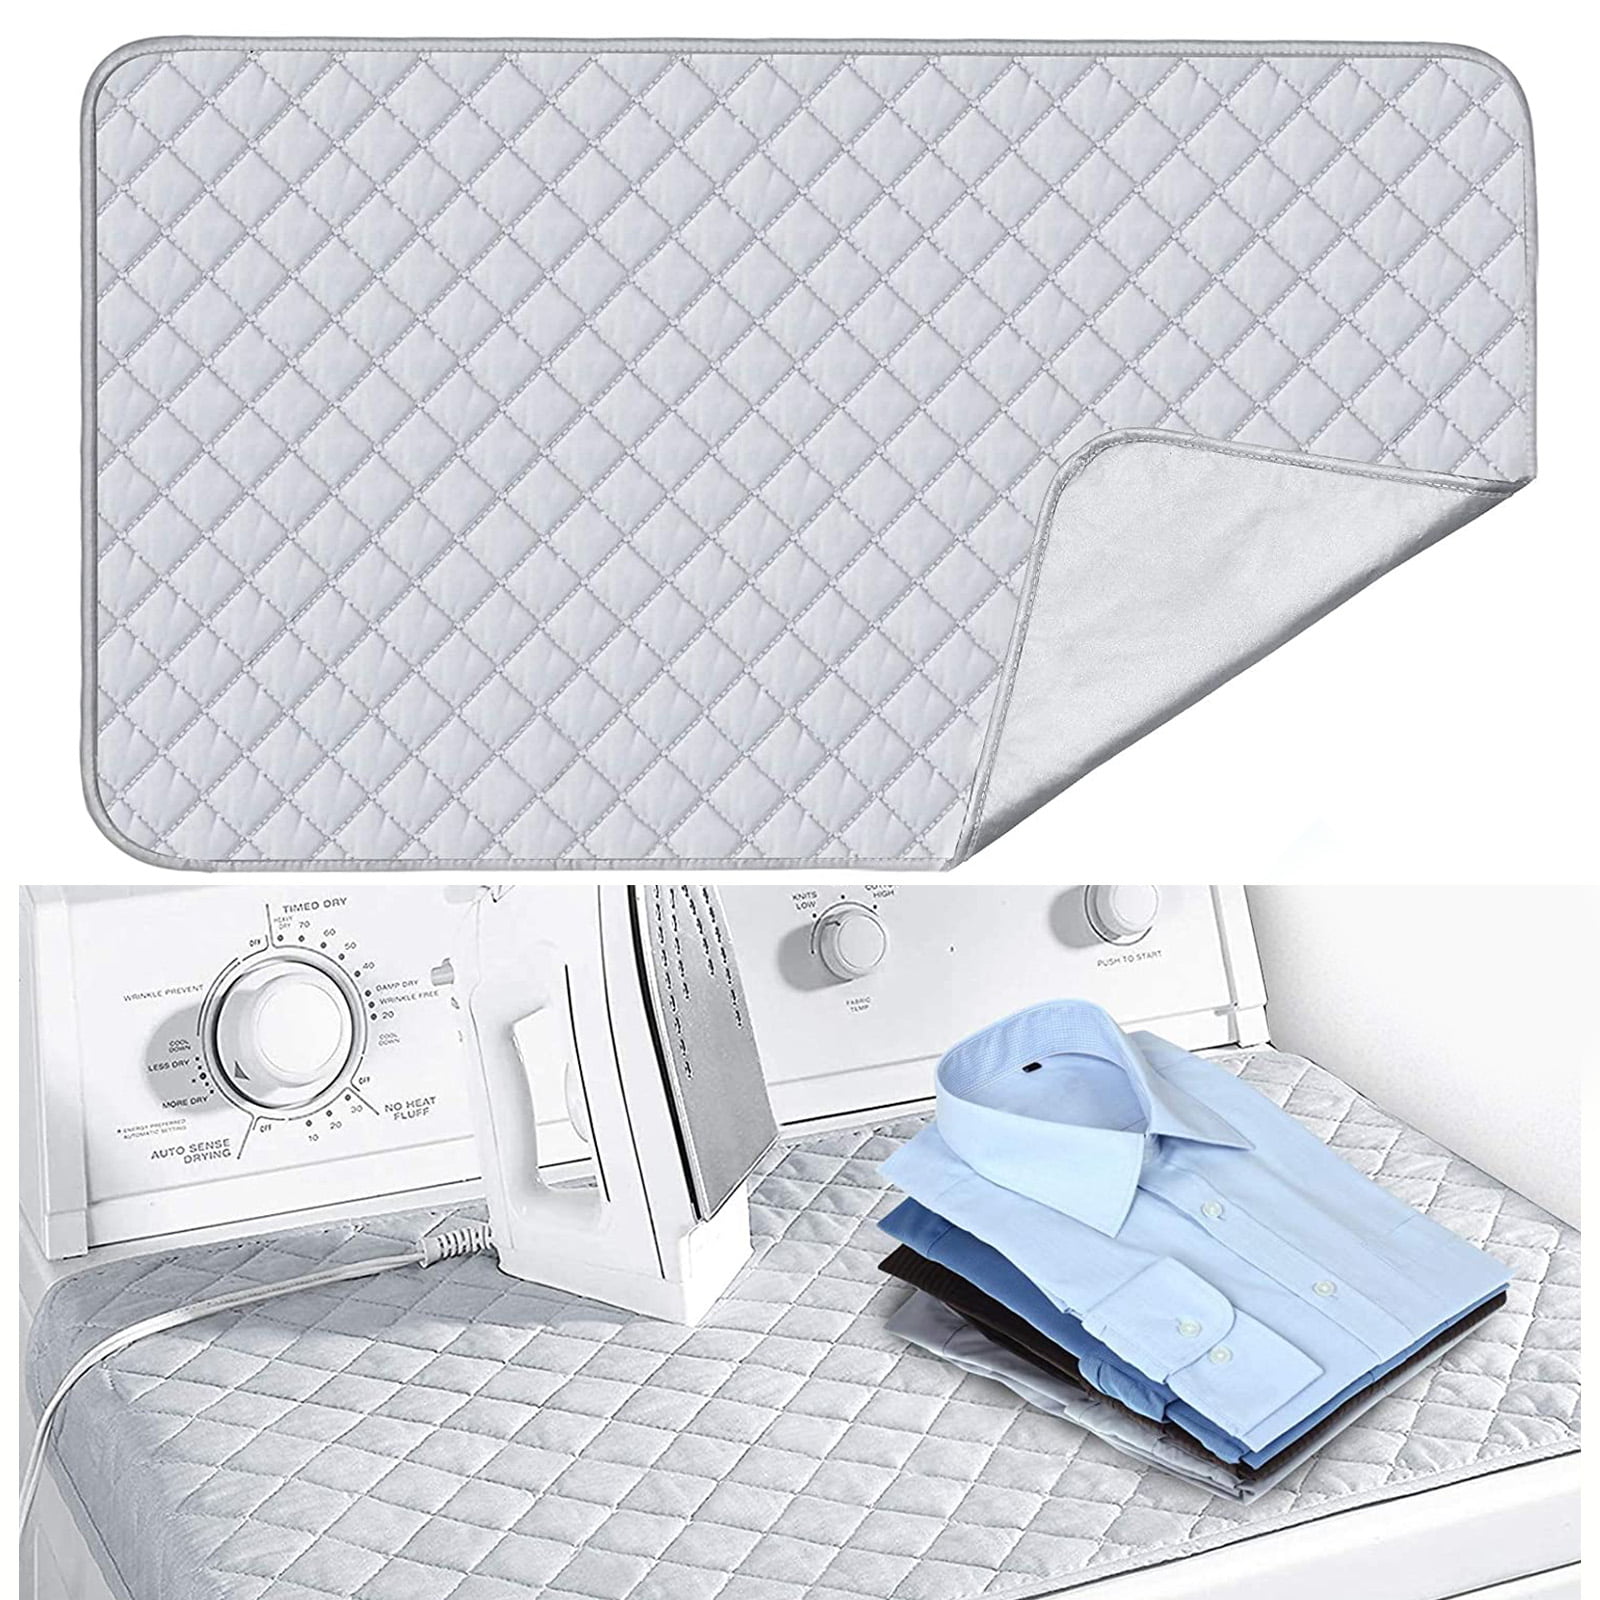 Travel Reflective Ironing Board Cover Washer Dryer Table Top Countertop Ironing Board for Ironing Board Pressing Pad 60 * 55cm Ironing Mat